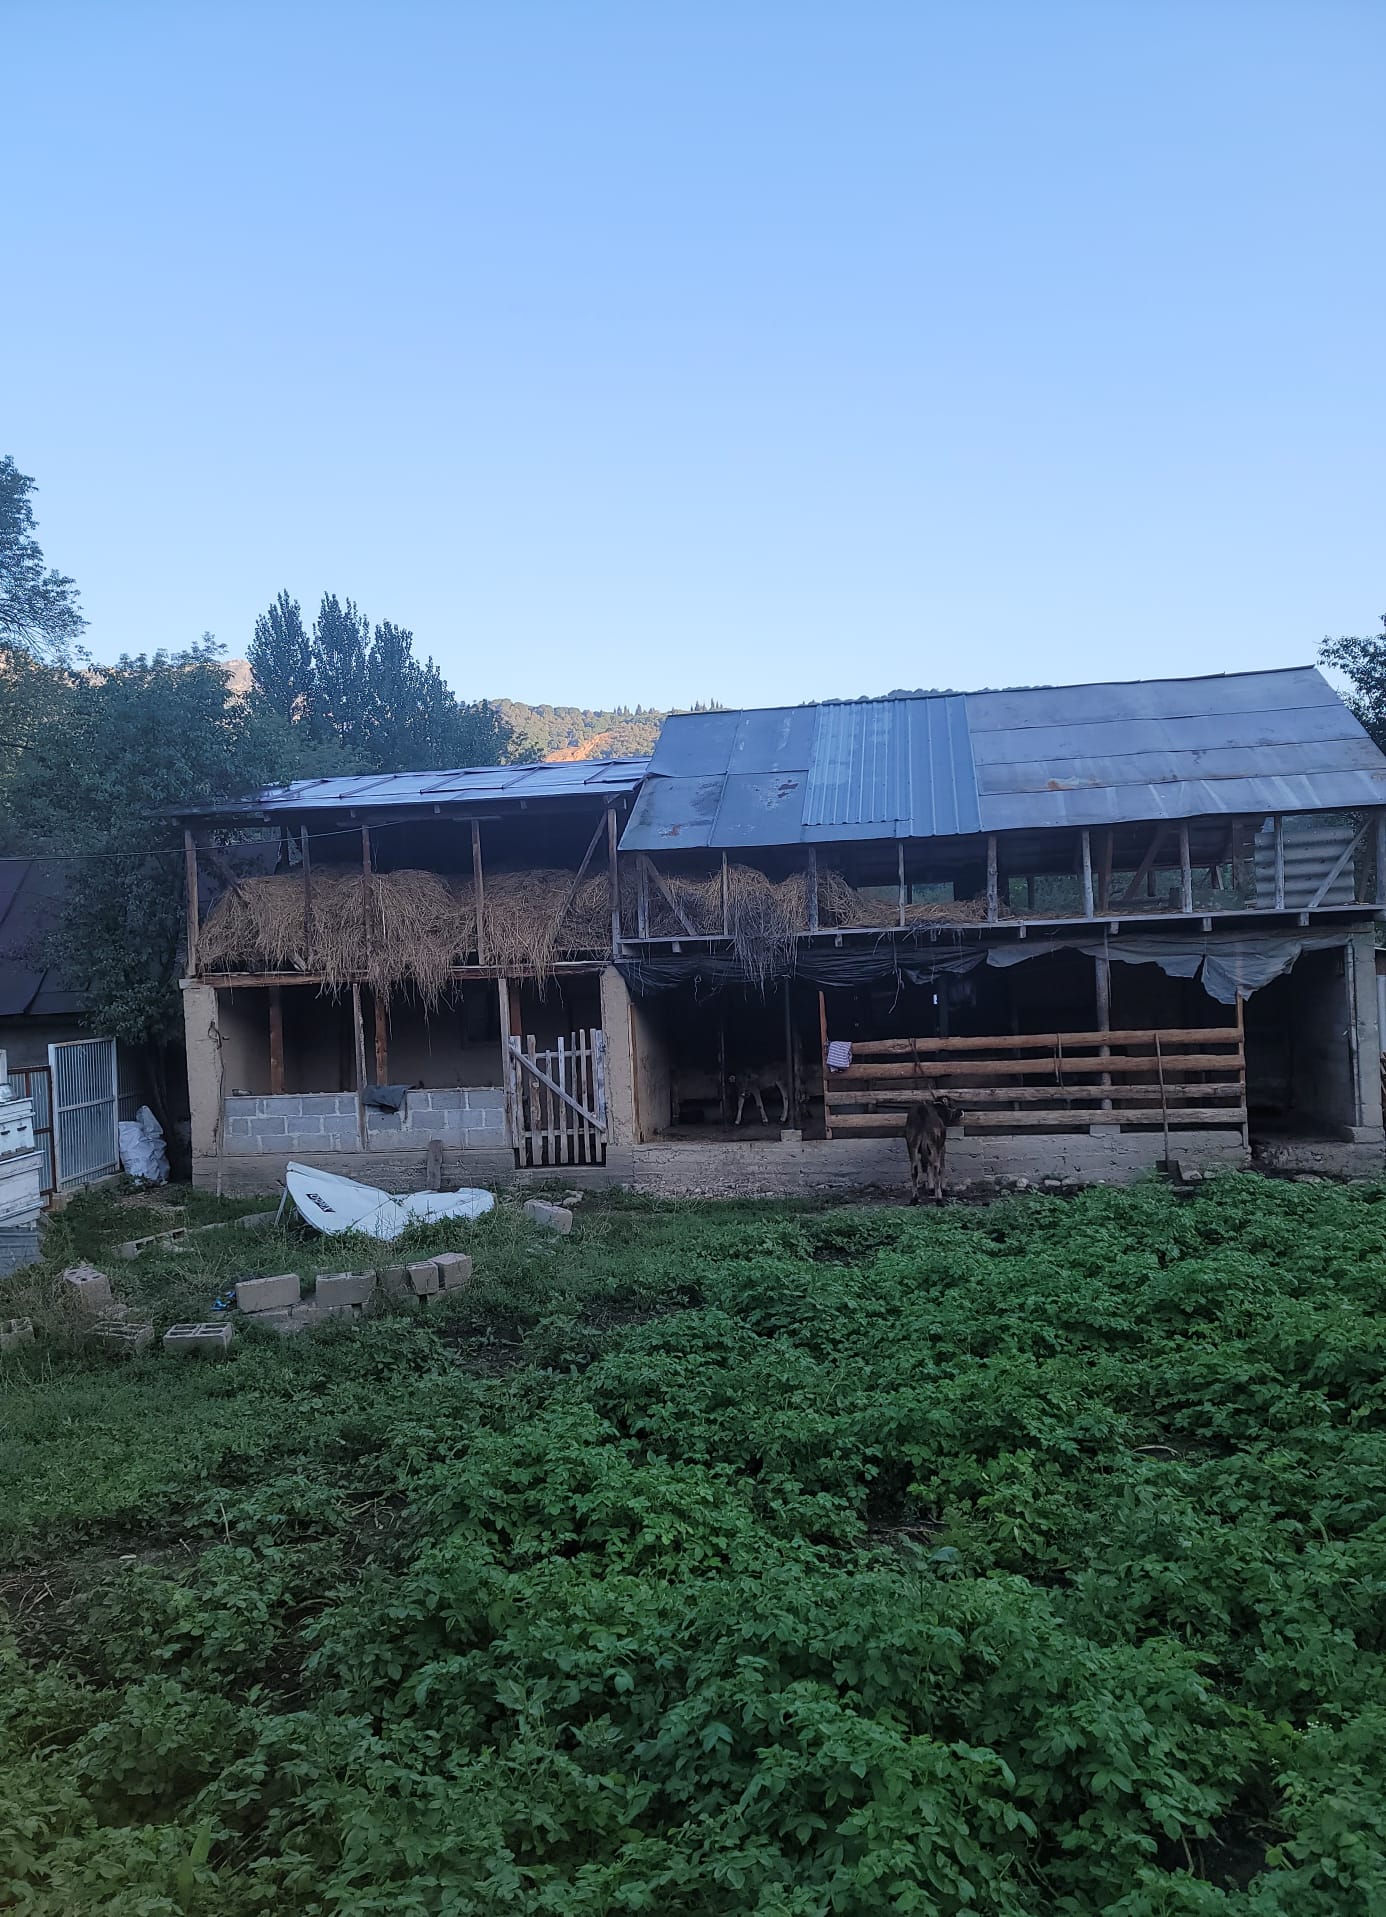 open-air stable made of concrete and wood with two floors and a tin roof. first floor for cows and second for hay bales. slightly overgrown green lawn in front of stable